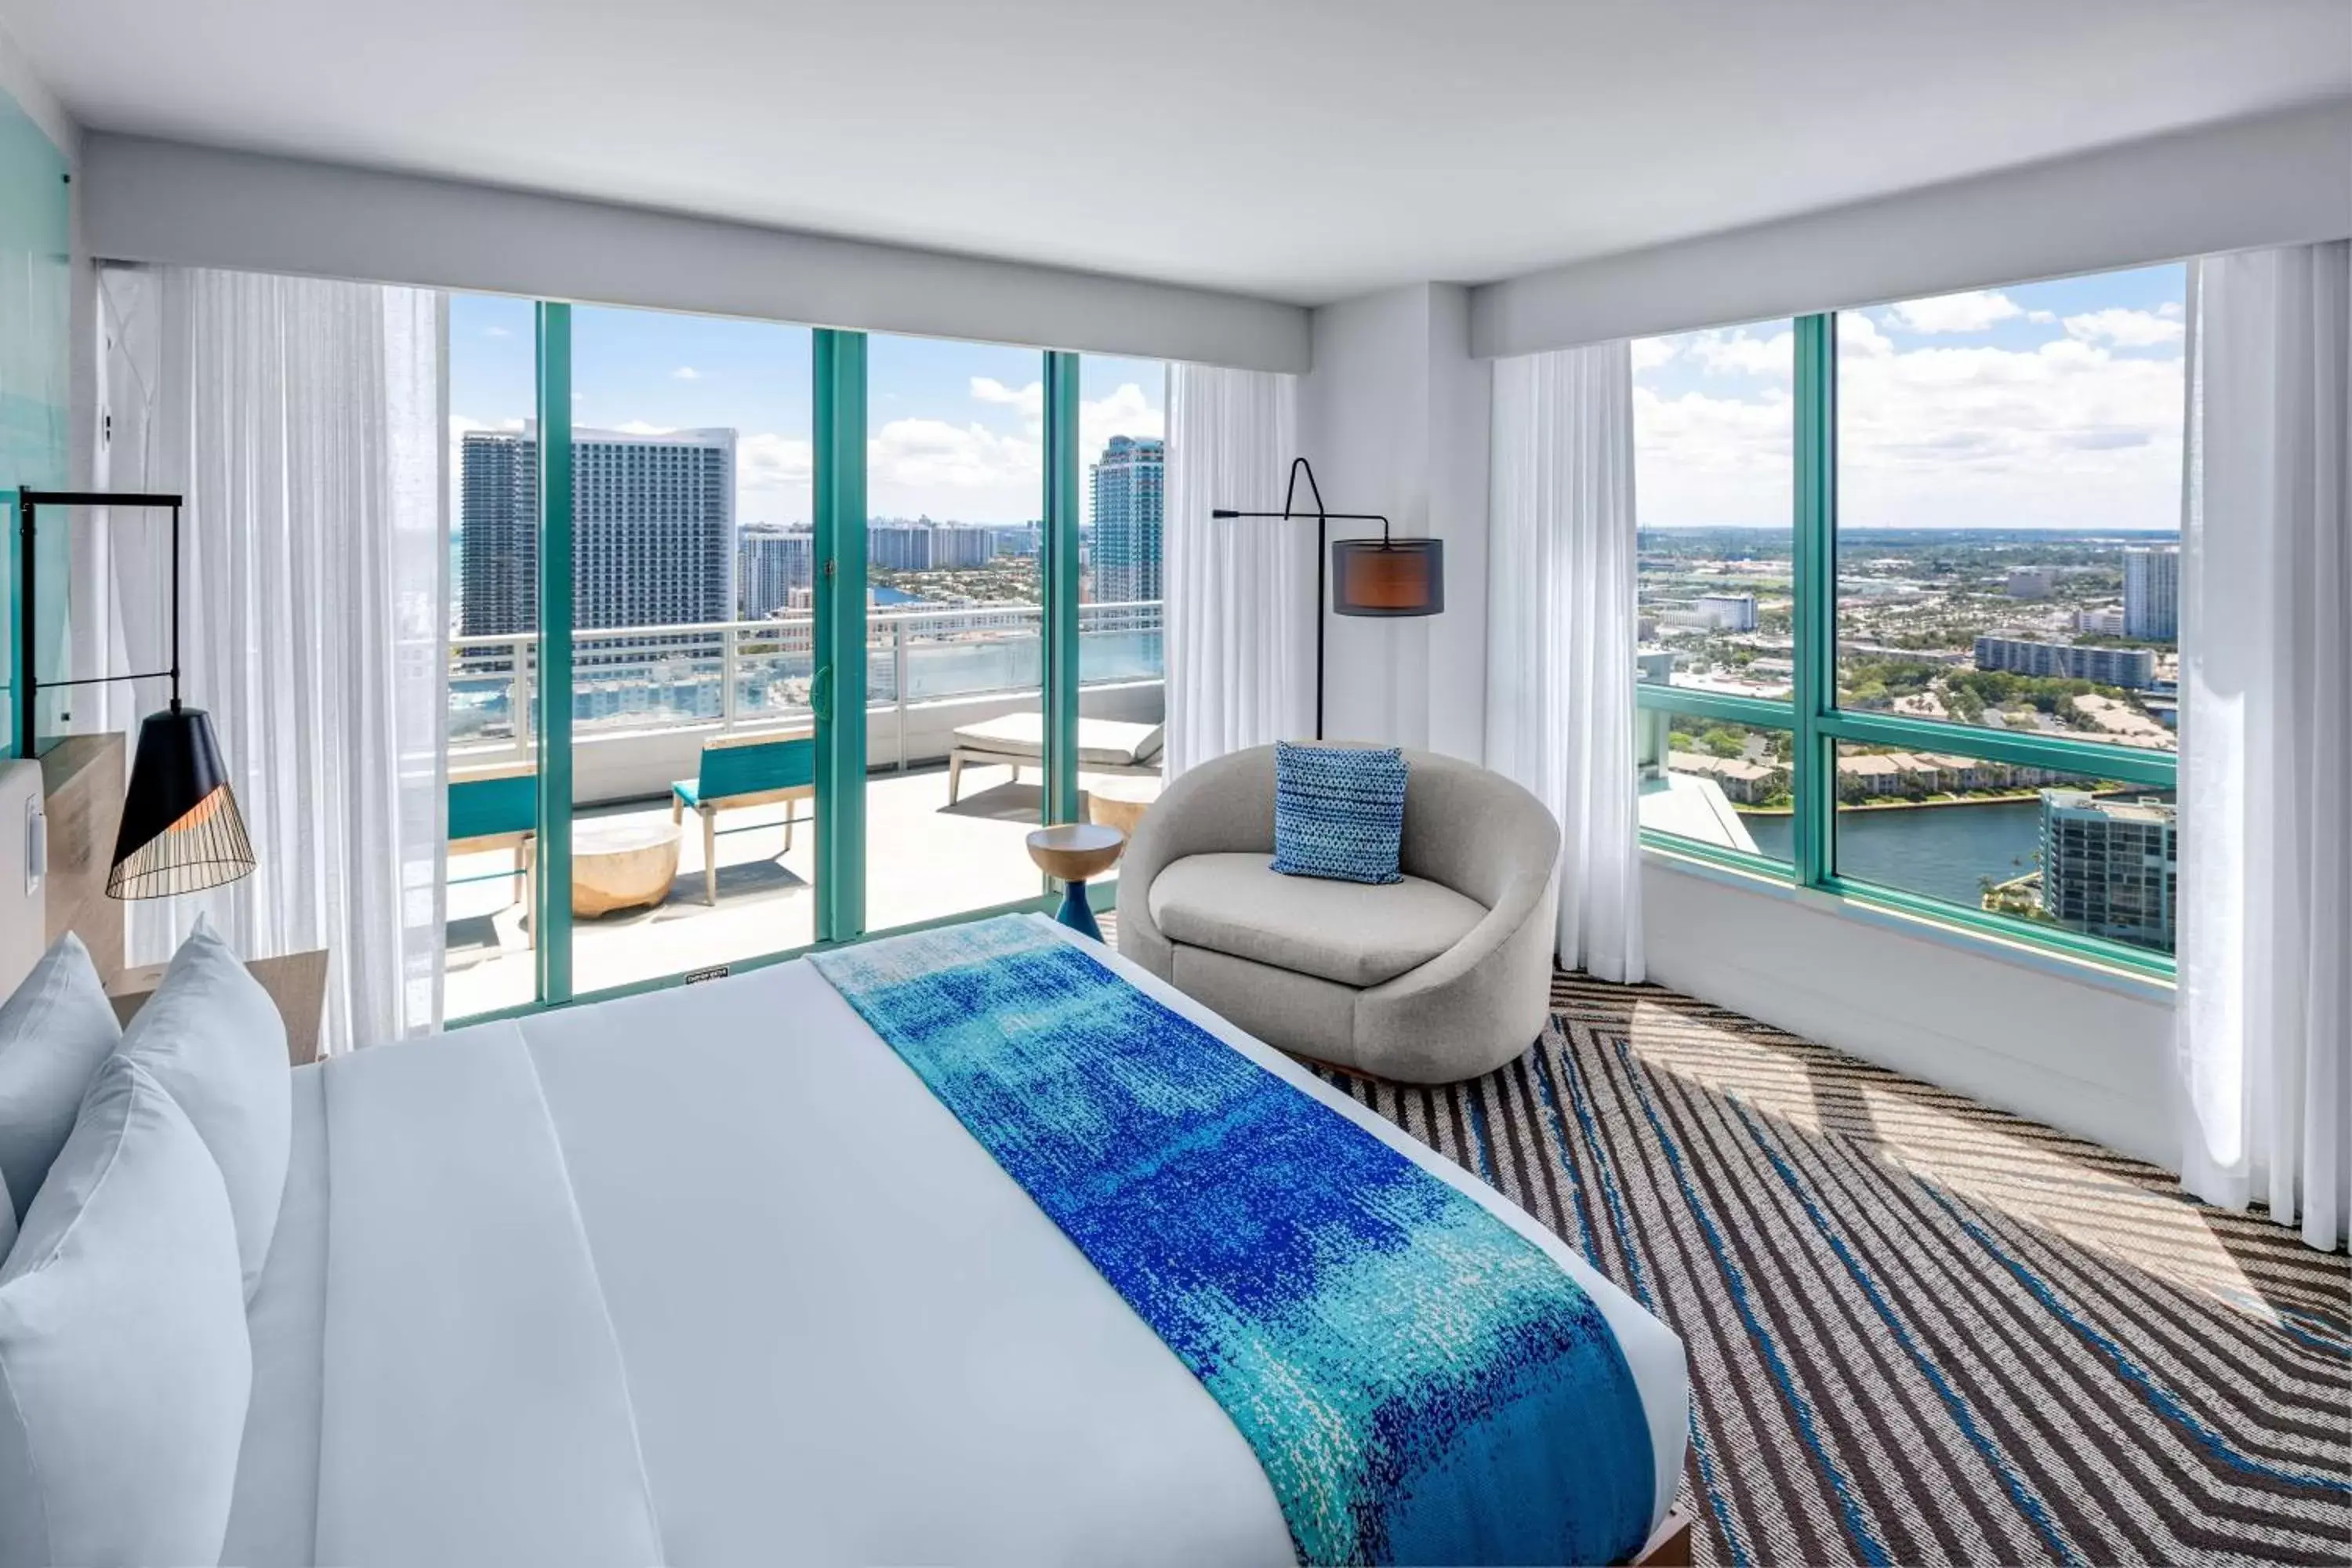 Bed, Pool View in The Diplomat Beach Resort Hollywood, Curio Collection by Hilton